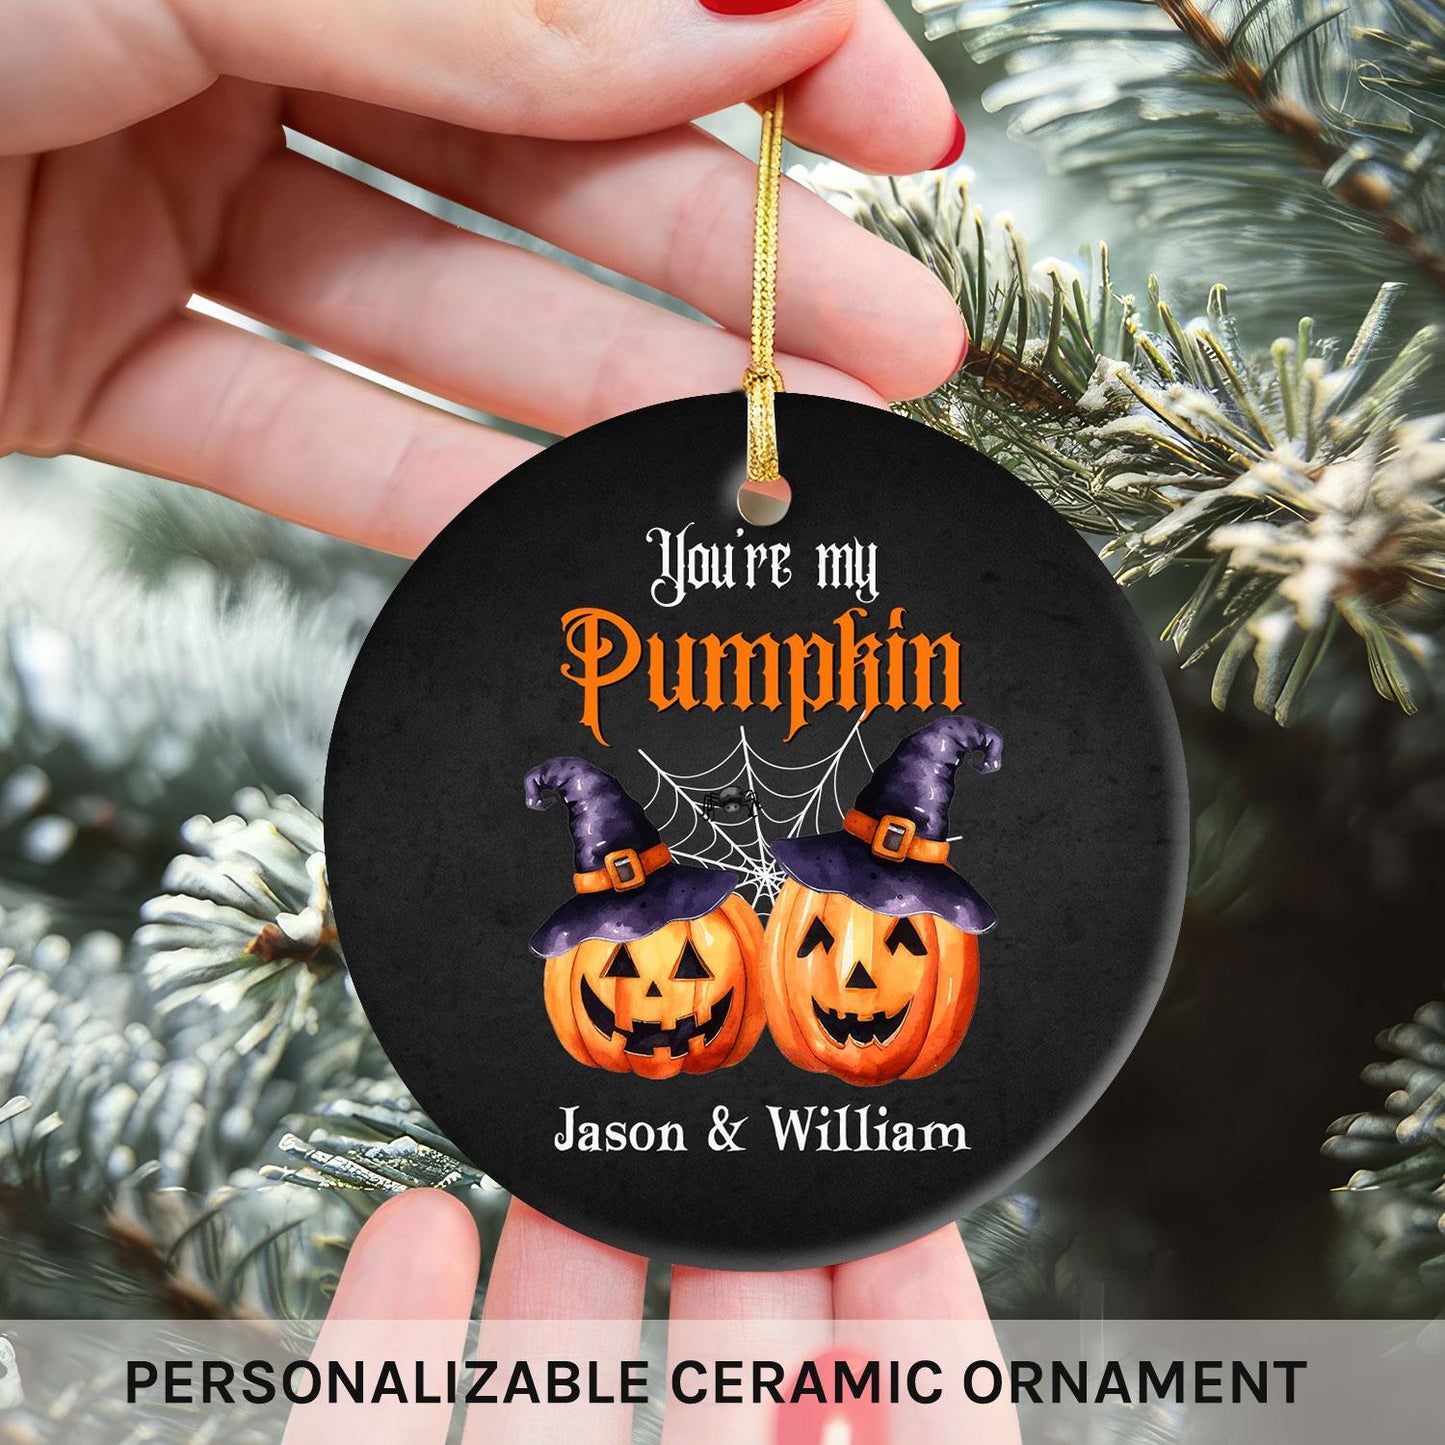 You're My Pumpkin - Personalized Anniversary or Halloween gift for Gay Couple - Custom Circle Ceramic Ornament - MyMindfulGifts